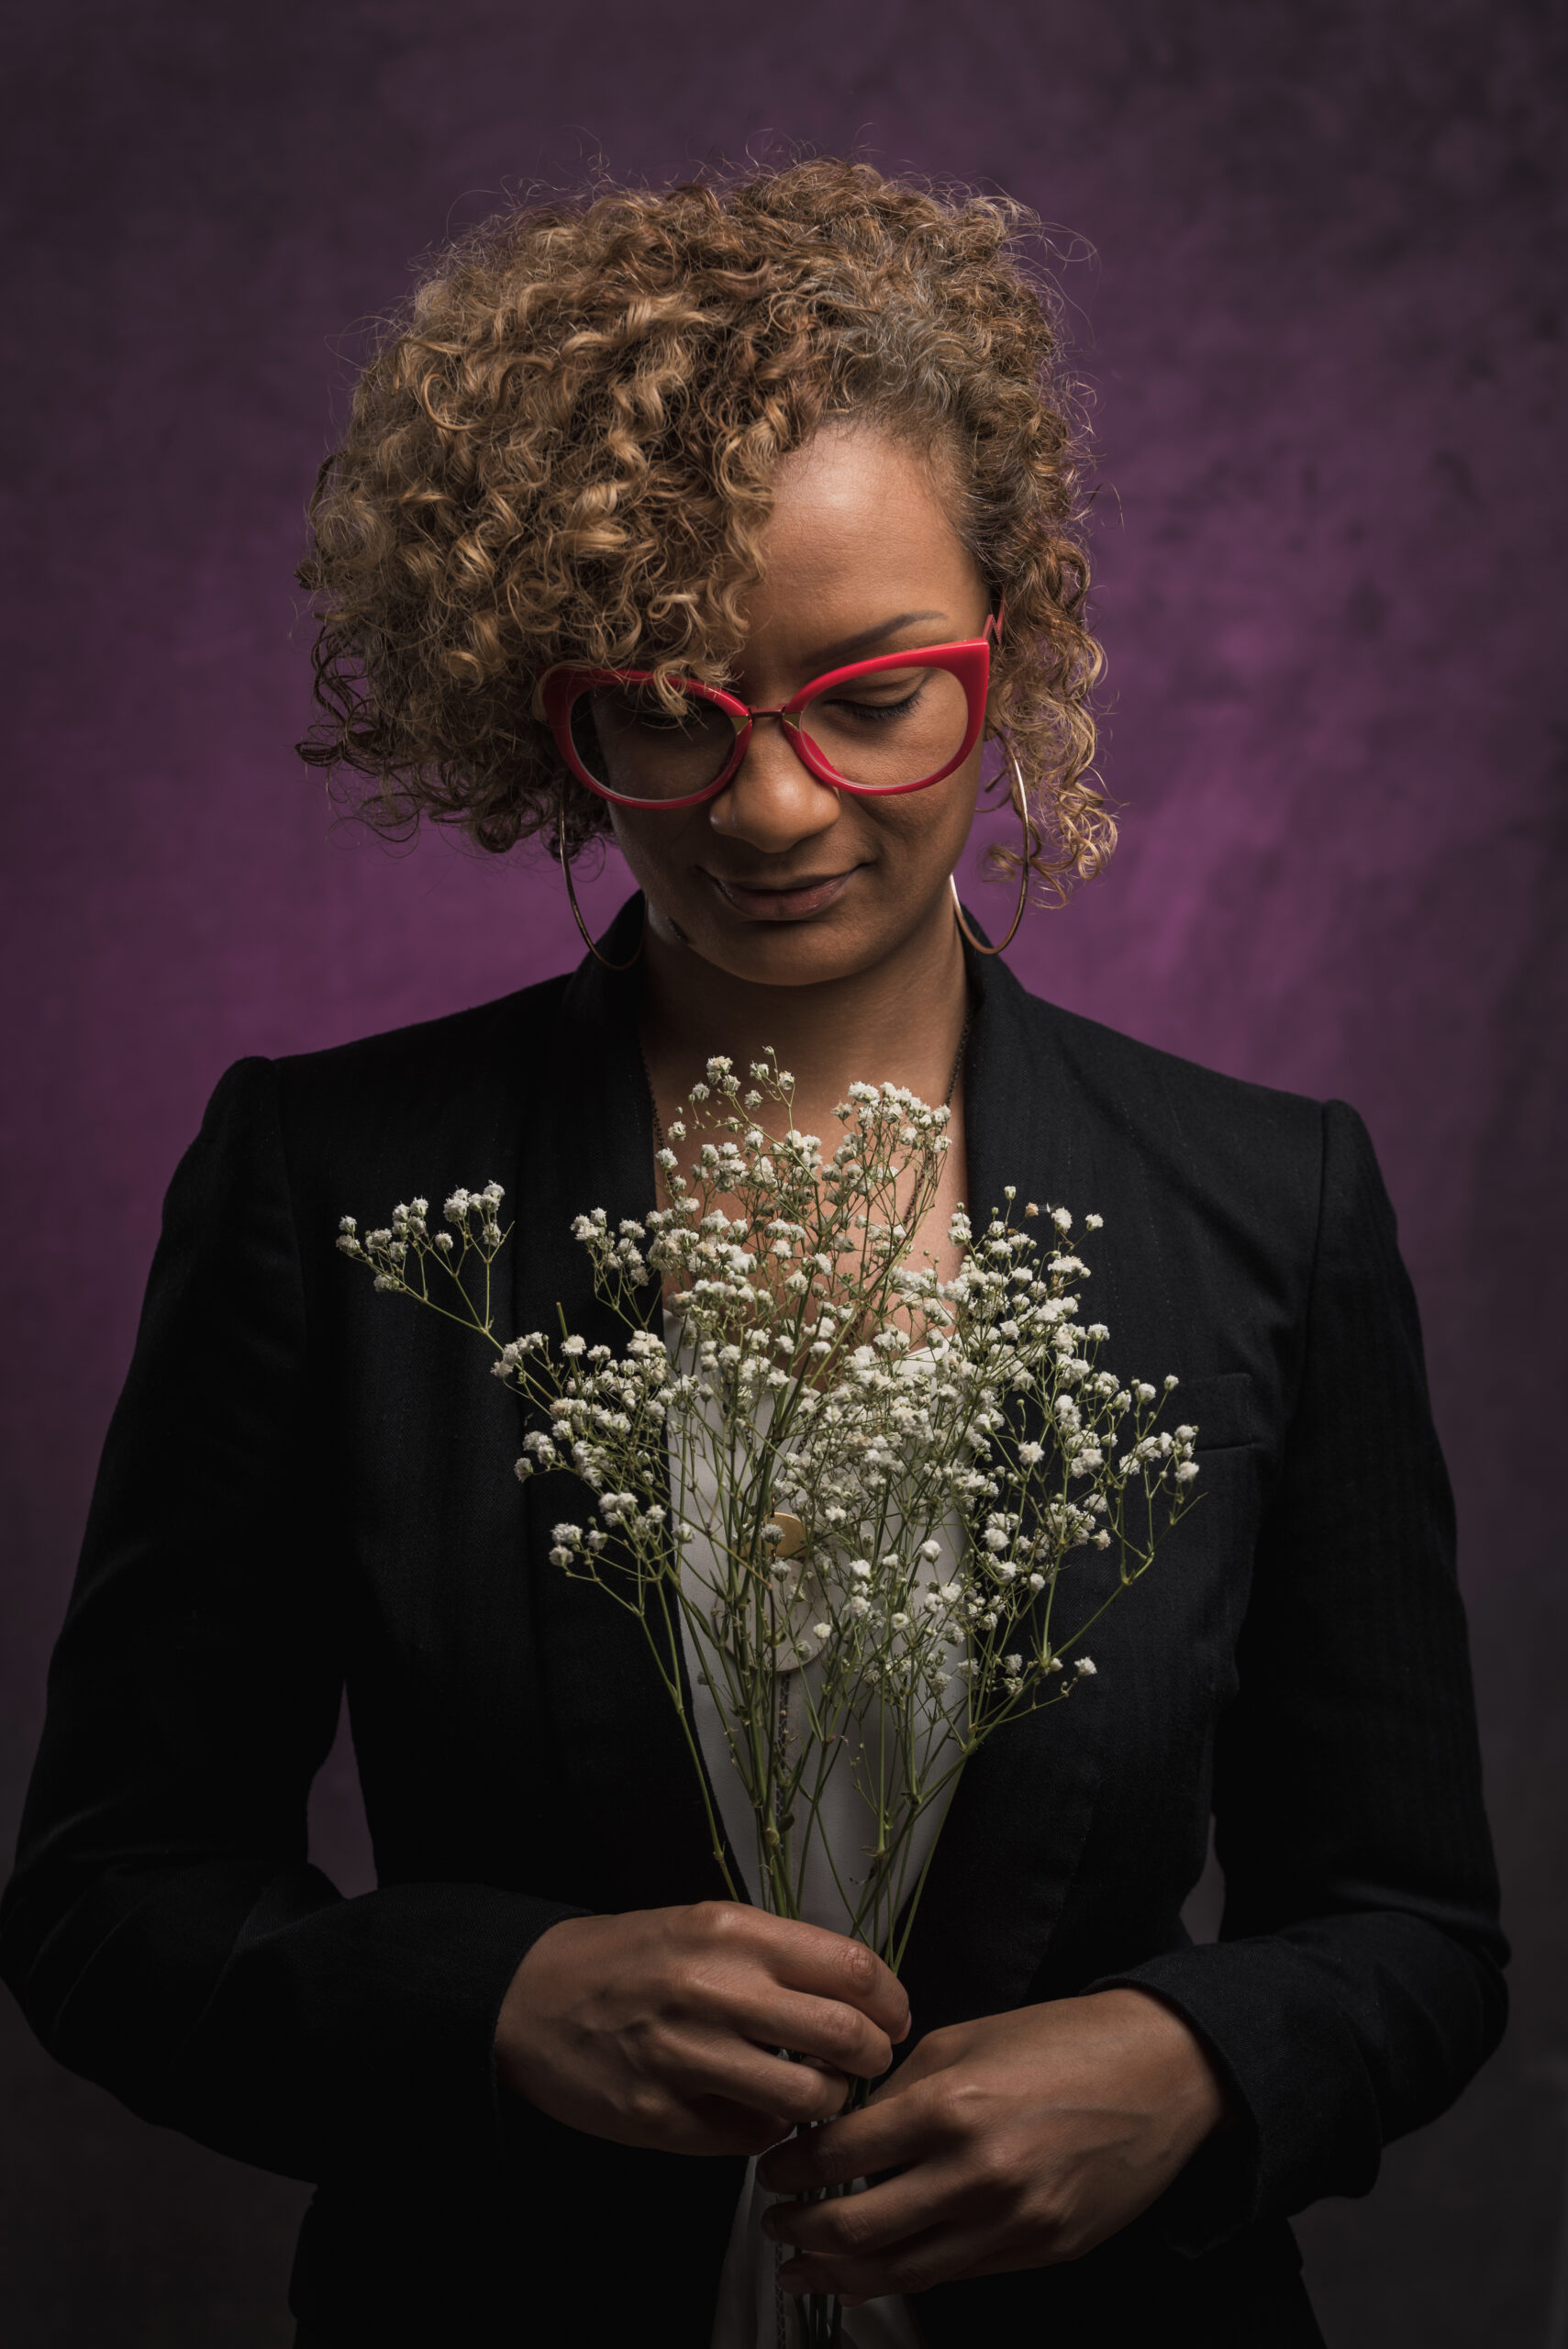 Photo of Chelene Knight against a purple background. Chelene is wearing red glasses and a black blazer, and she is looking downward at a bouquet of flowers.